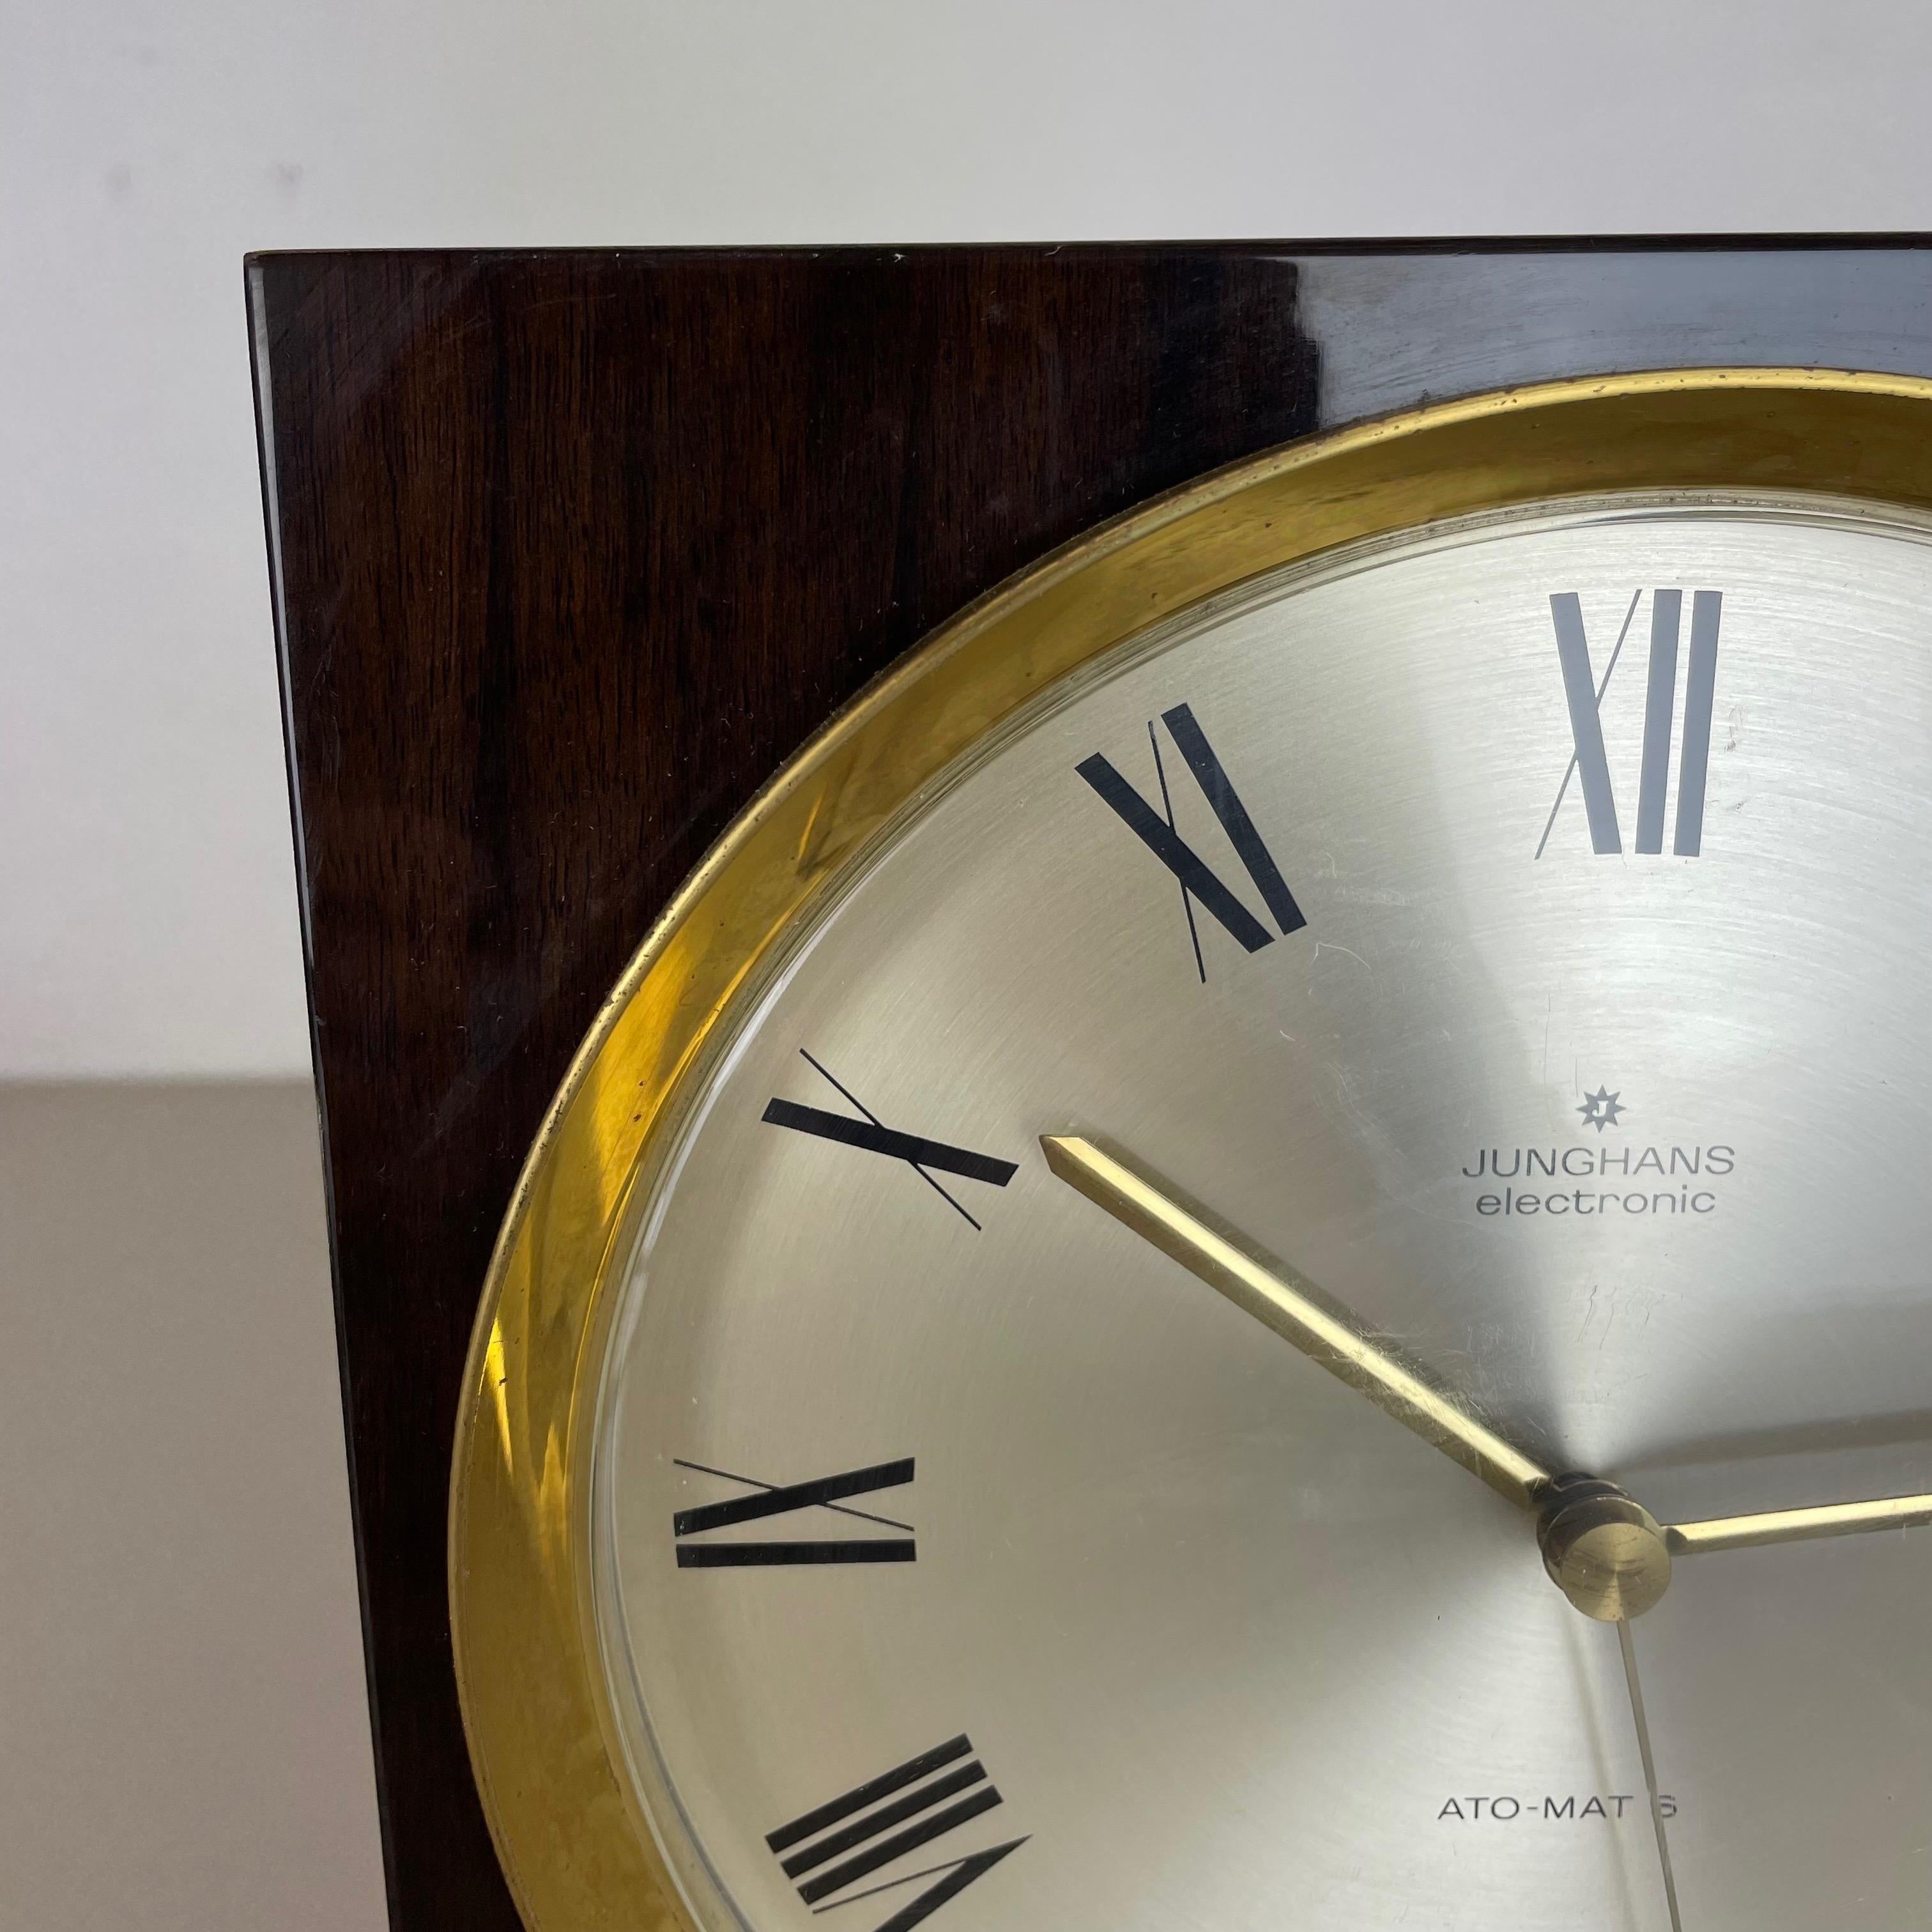 Vintage Modernist Wood + Brass Table and Wall Clock by Junghans, Germany, 1970s For Sale 2